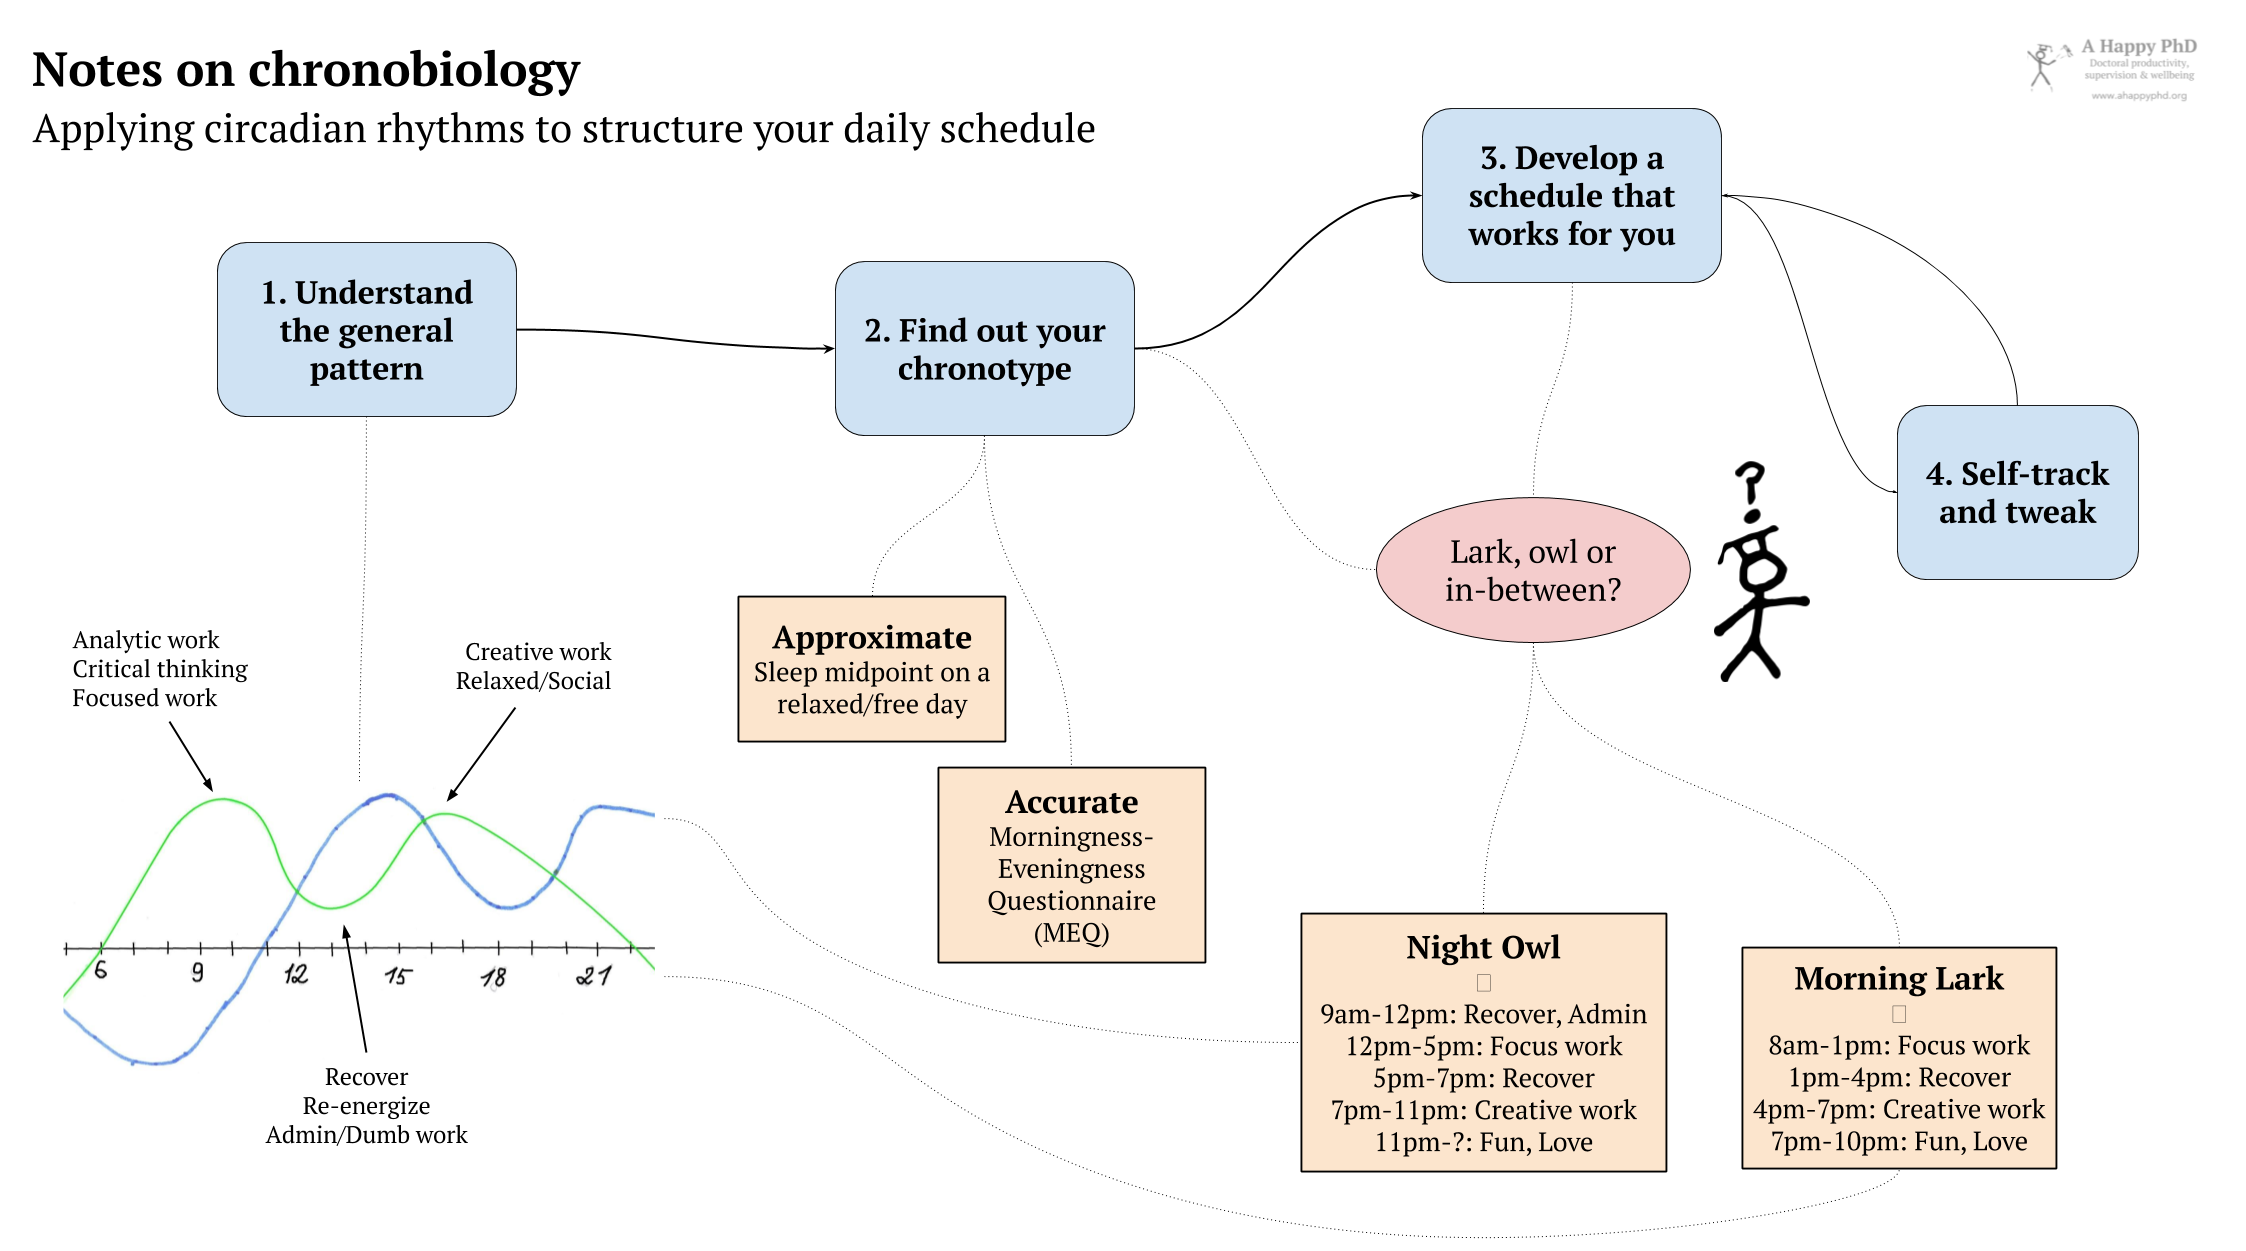 Diagram showing the main ideas of the post: understanding the general circadian pattern, finding your chronotype and working out a good schedule